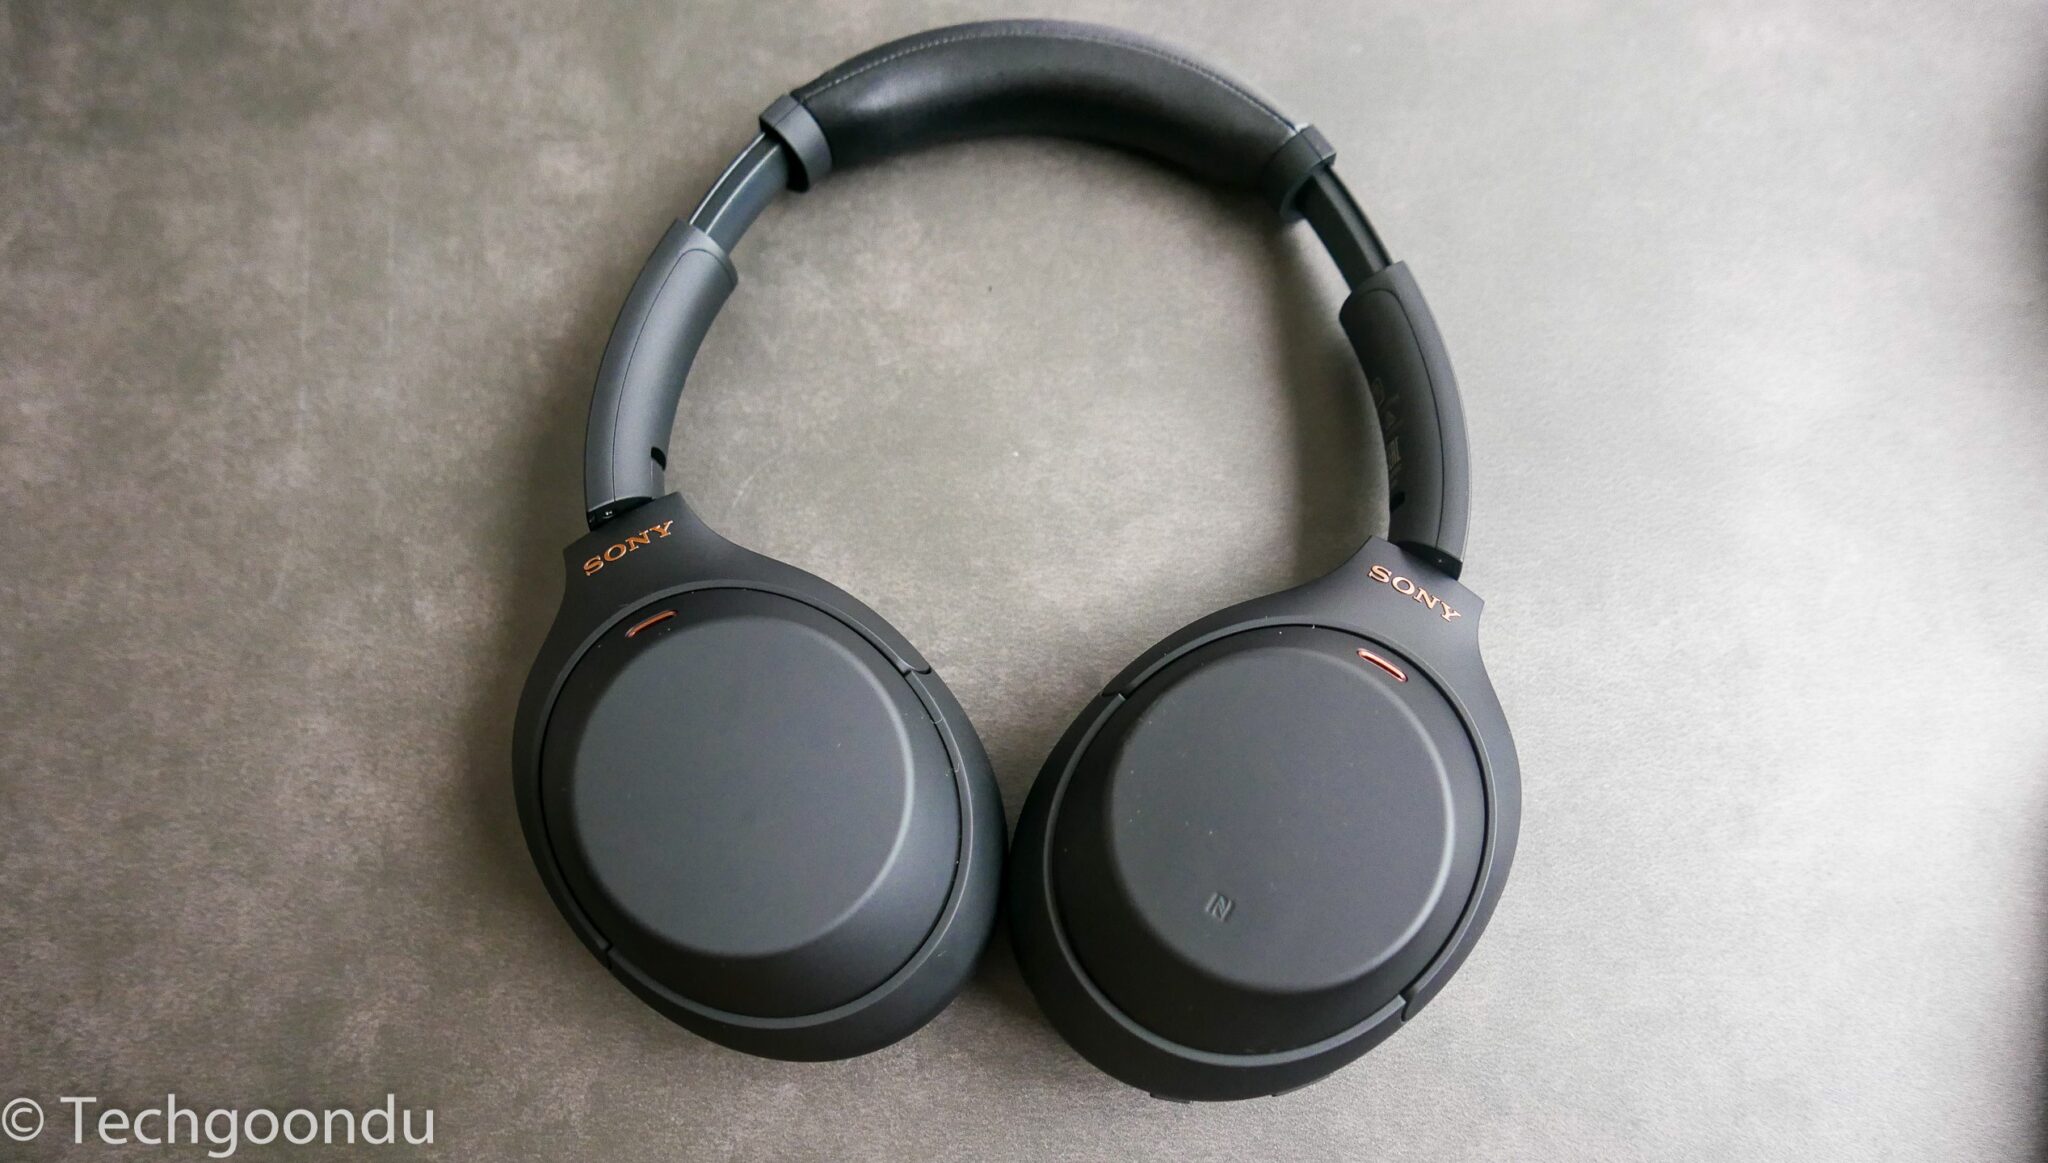 Goondu review: Sony WH-1000XM4 are the noise cancelling headphones to ...